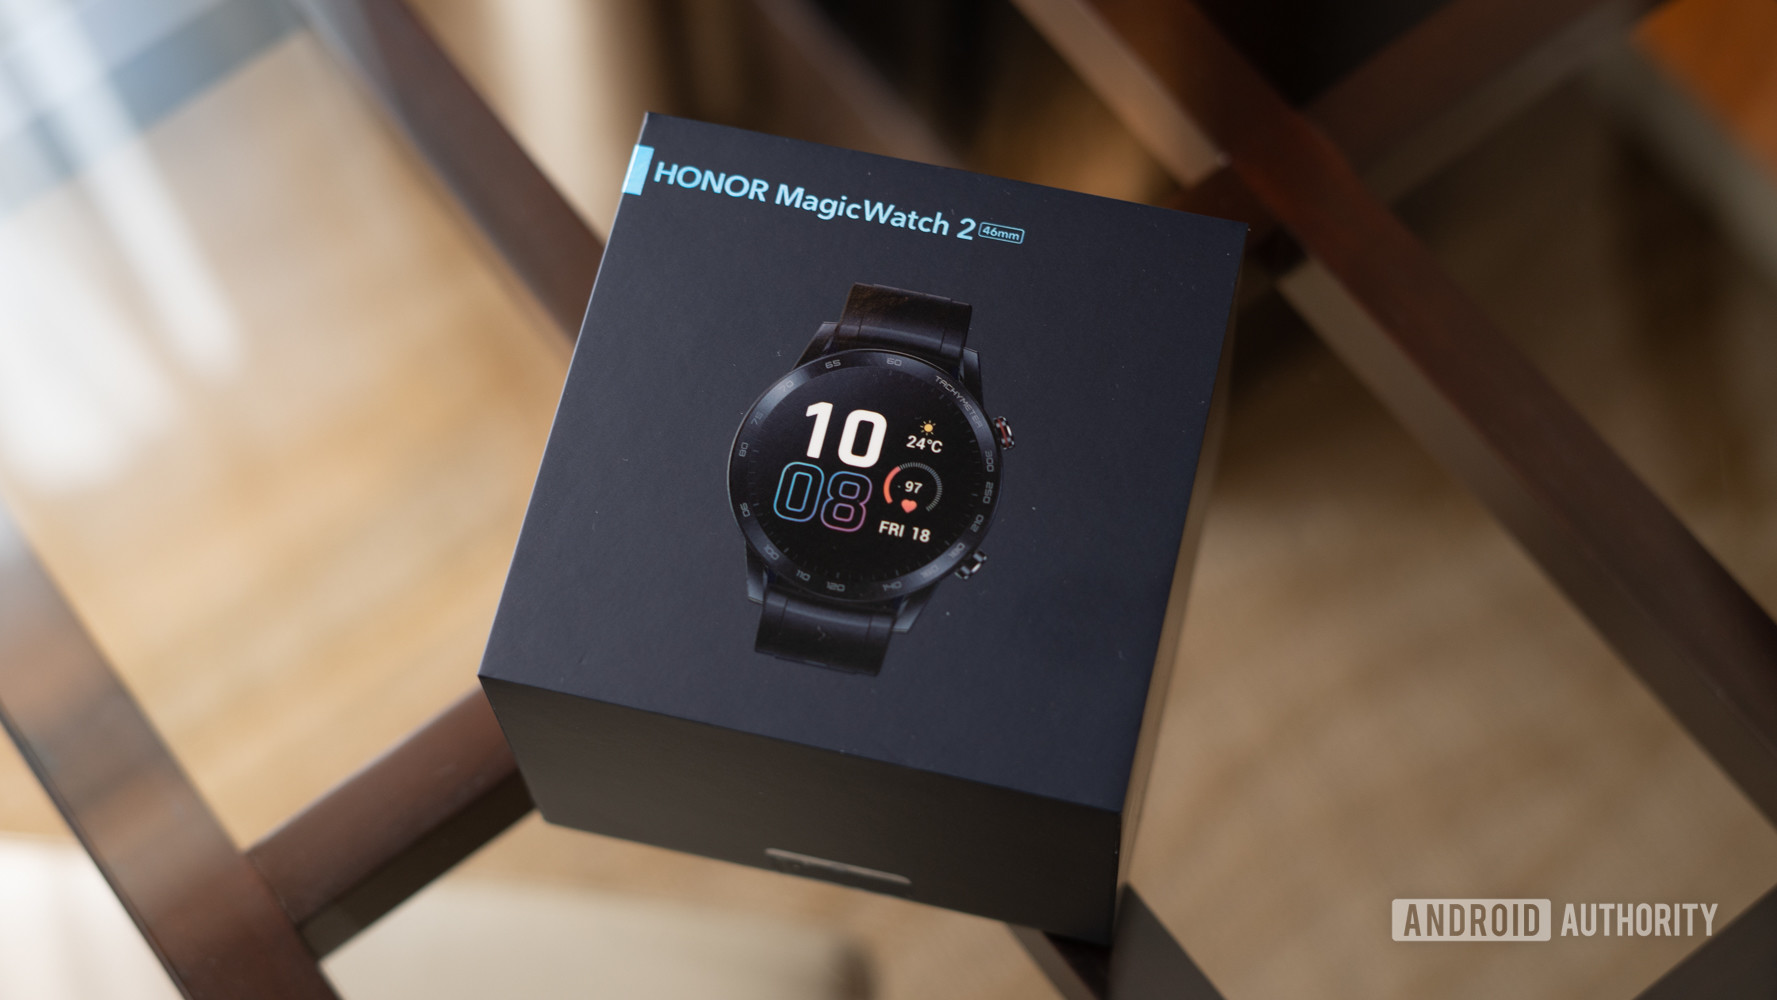 The HONOR Watch Magic 2 in its box.